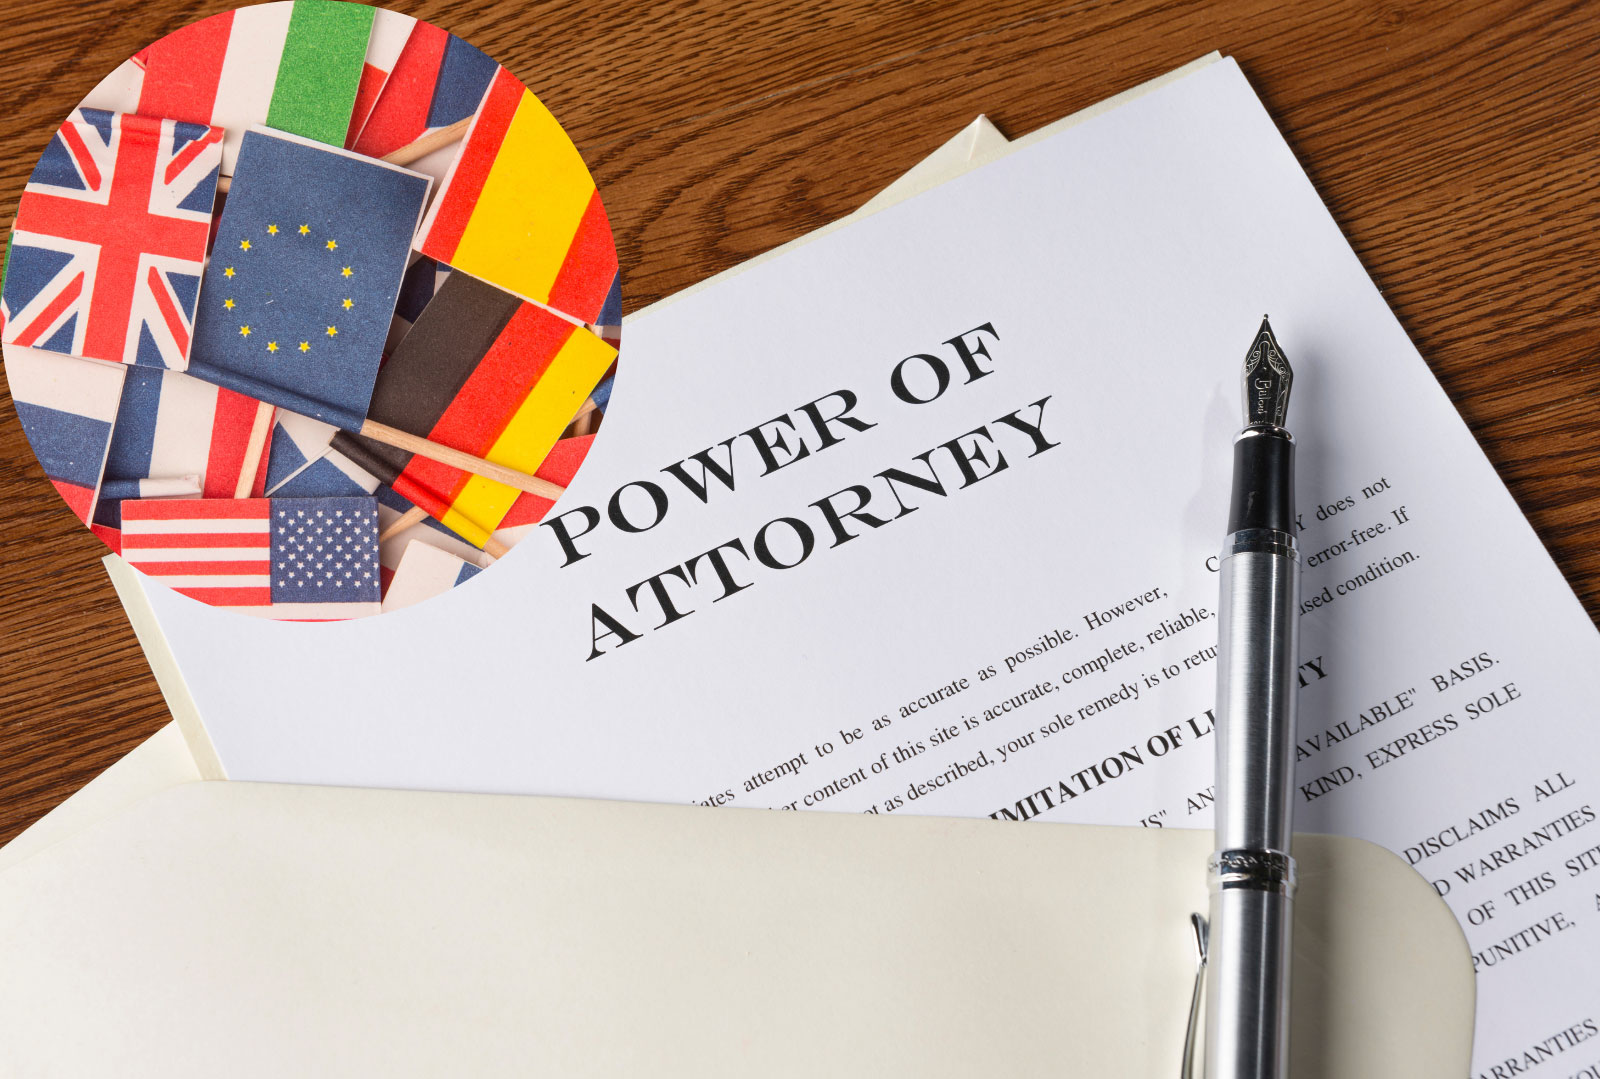 How to register a foreign power of attorney